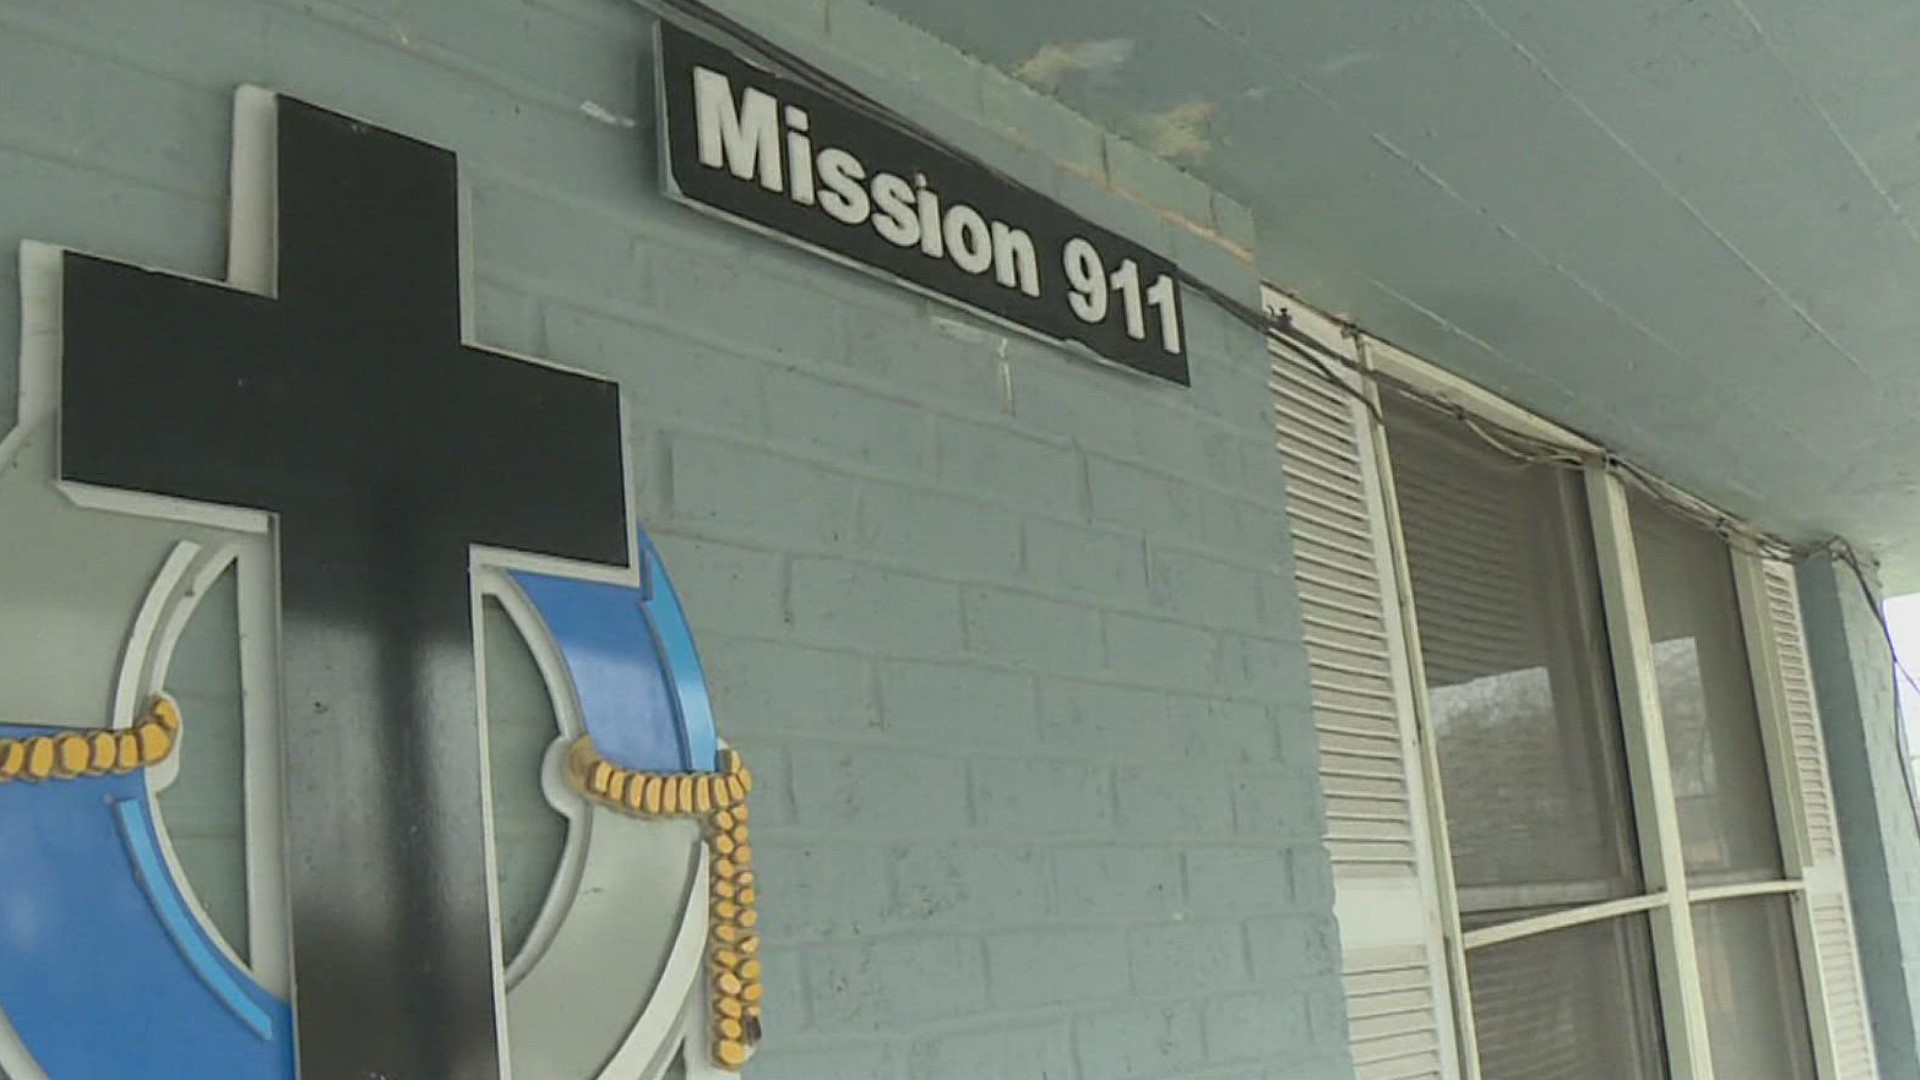 Cold weather brings a need for clothes, and there's an increased call for donations by Mission 911.